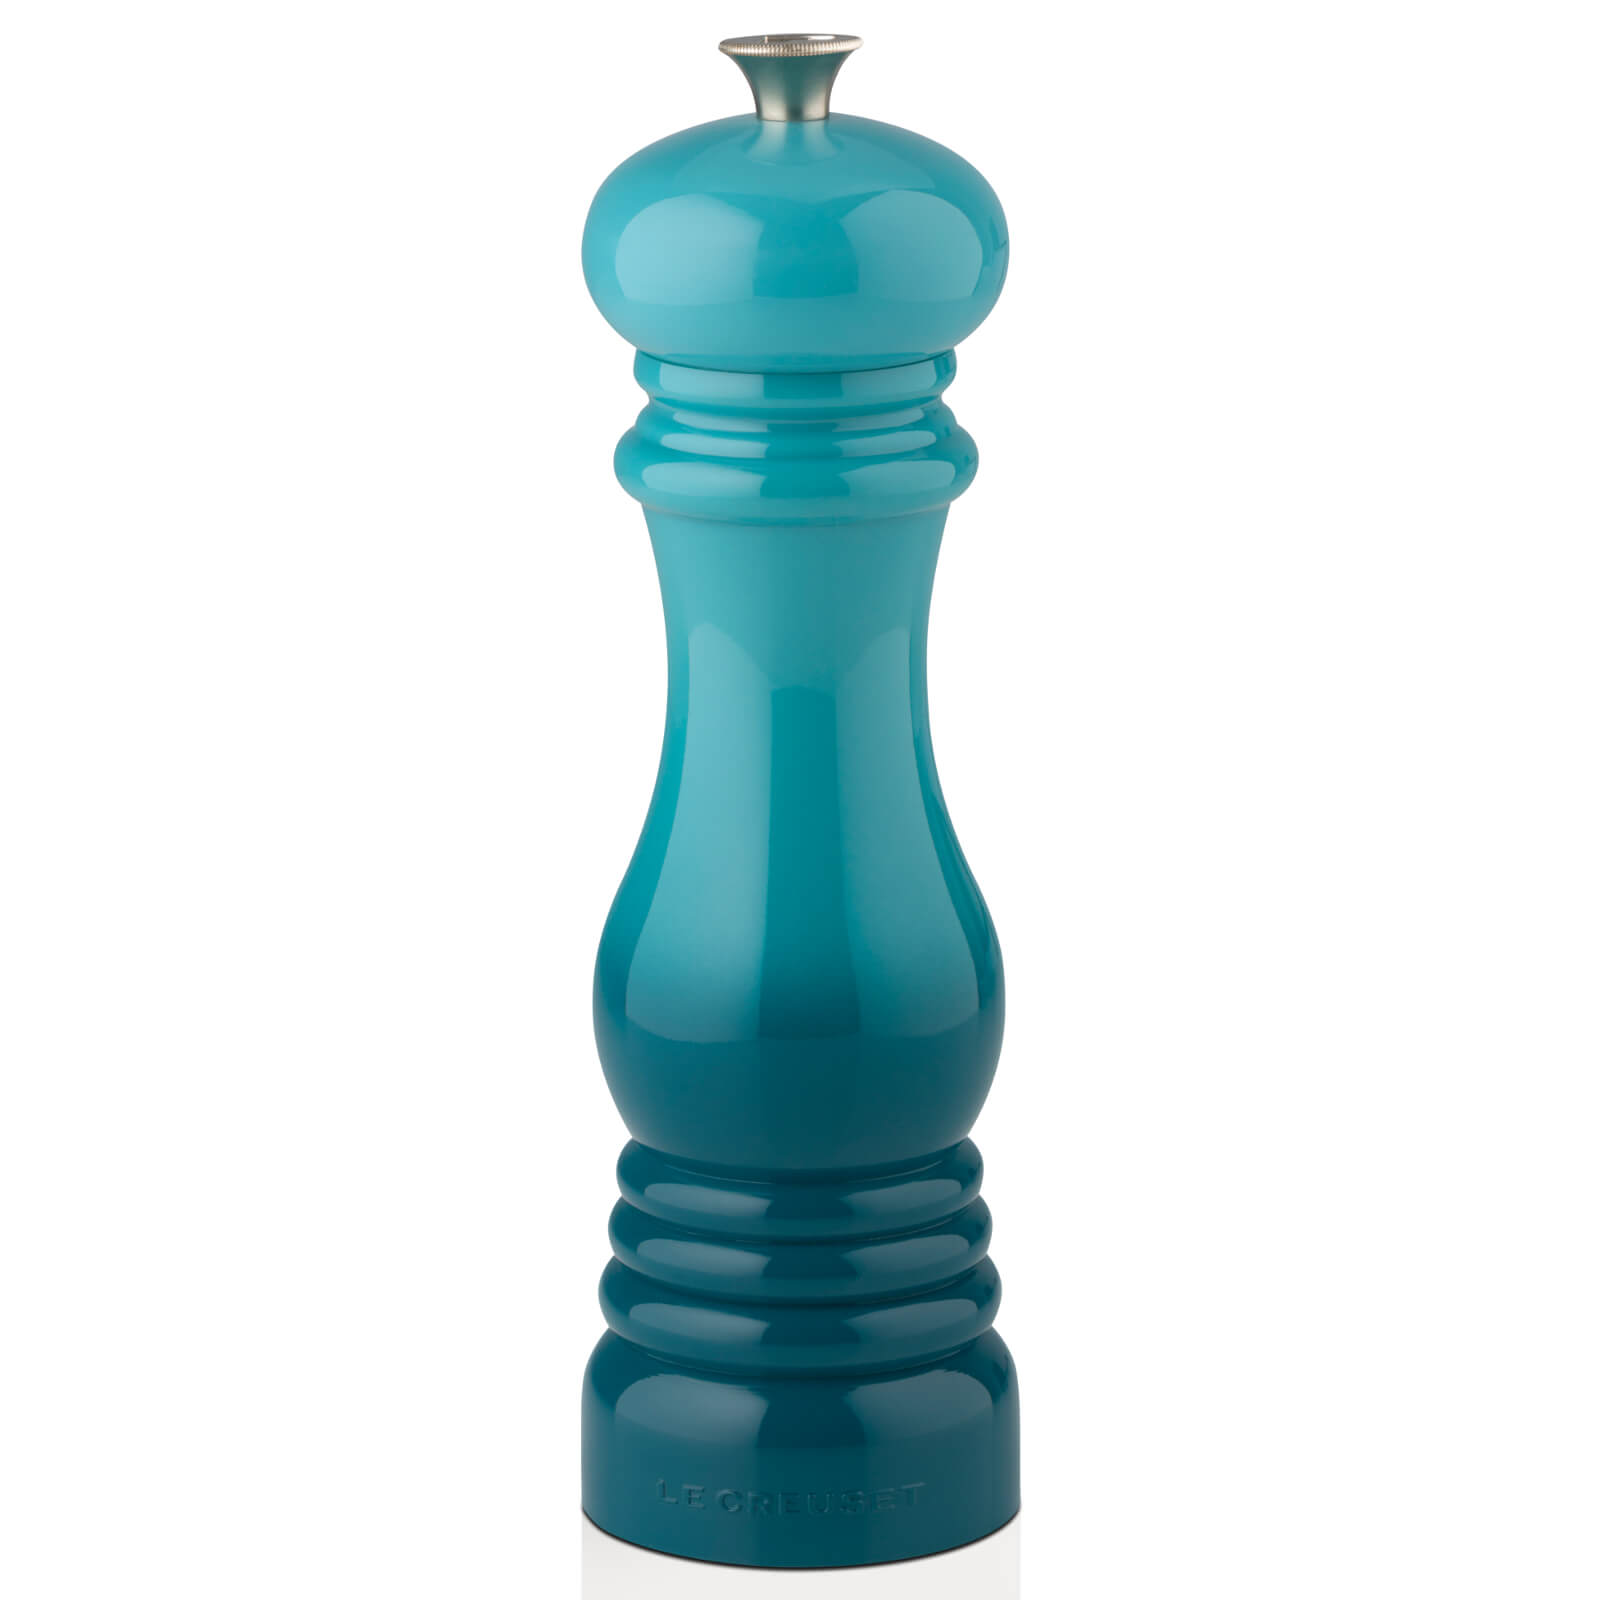 Photos - Other tableware Le Creuset Classic Pepper Mill - Teal 9600190017 